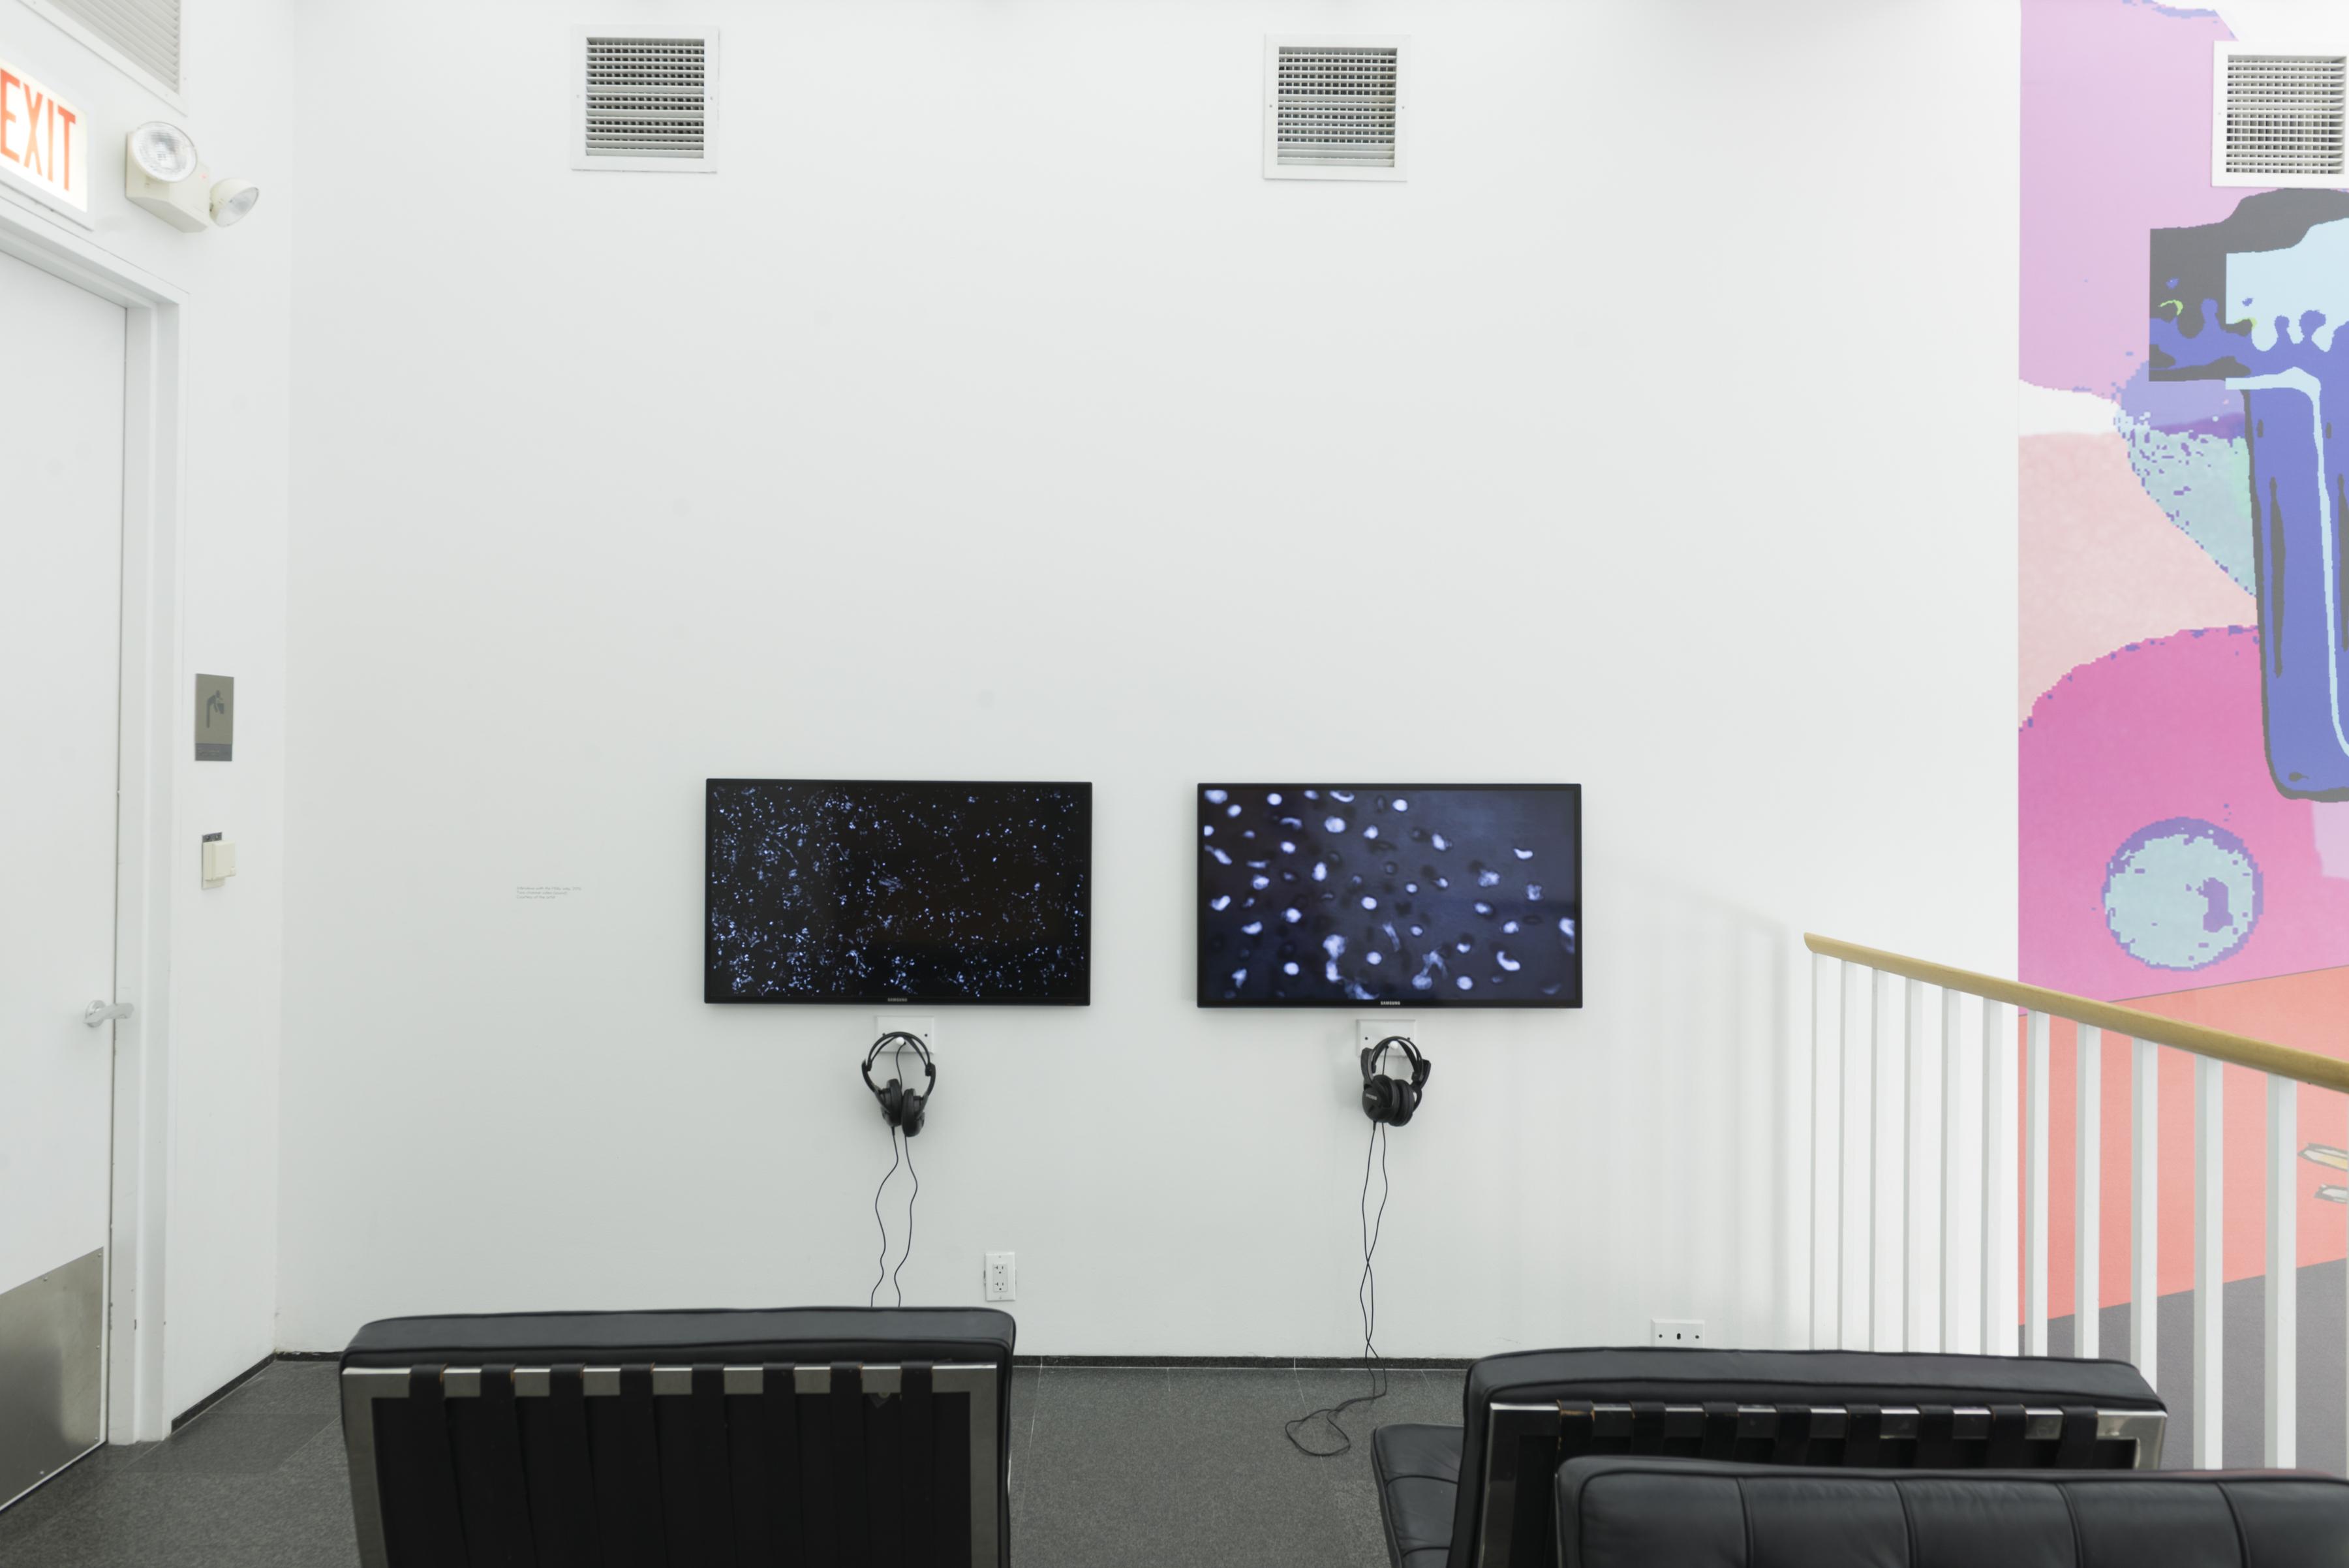 Two wall-mounted flat screens in a white gallery space with headphones attached, show white objects on a black background. A black leather chair is situated in front of each television.